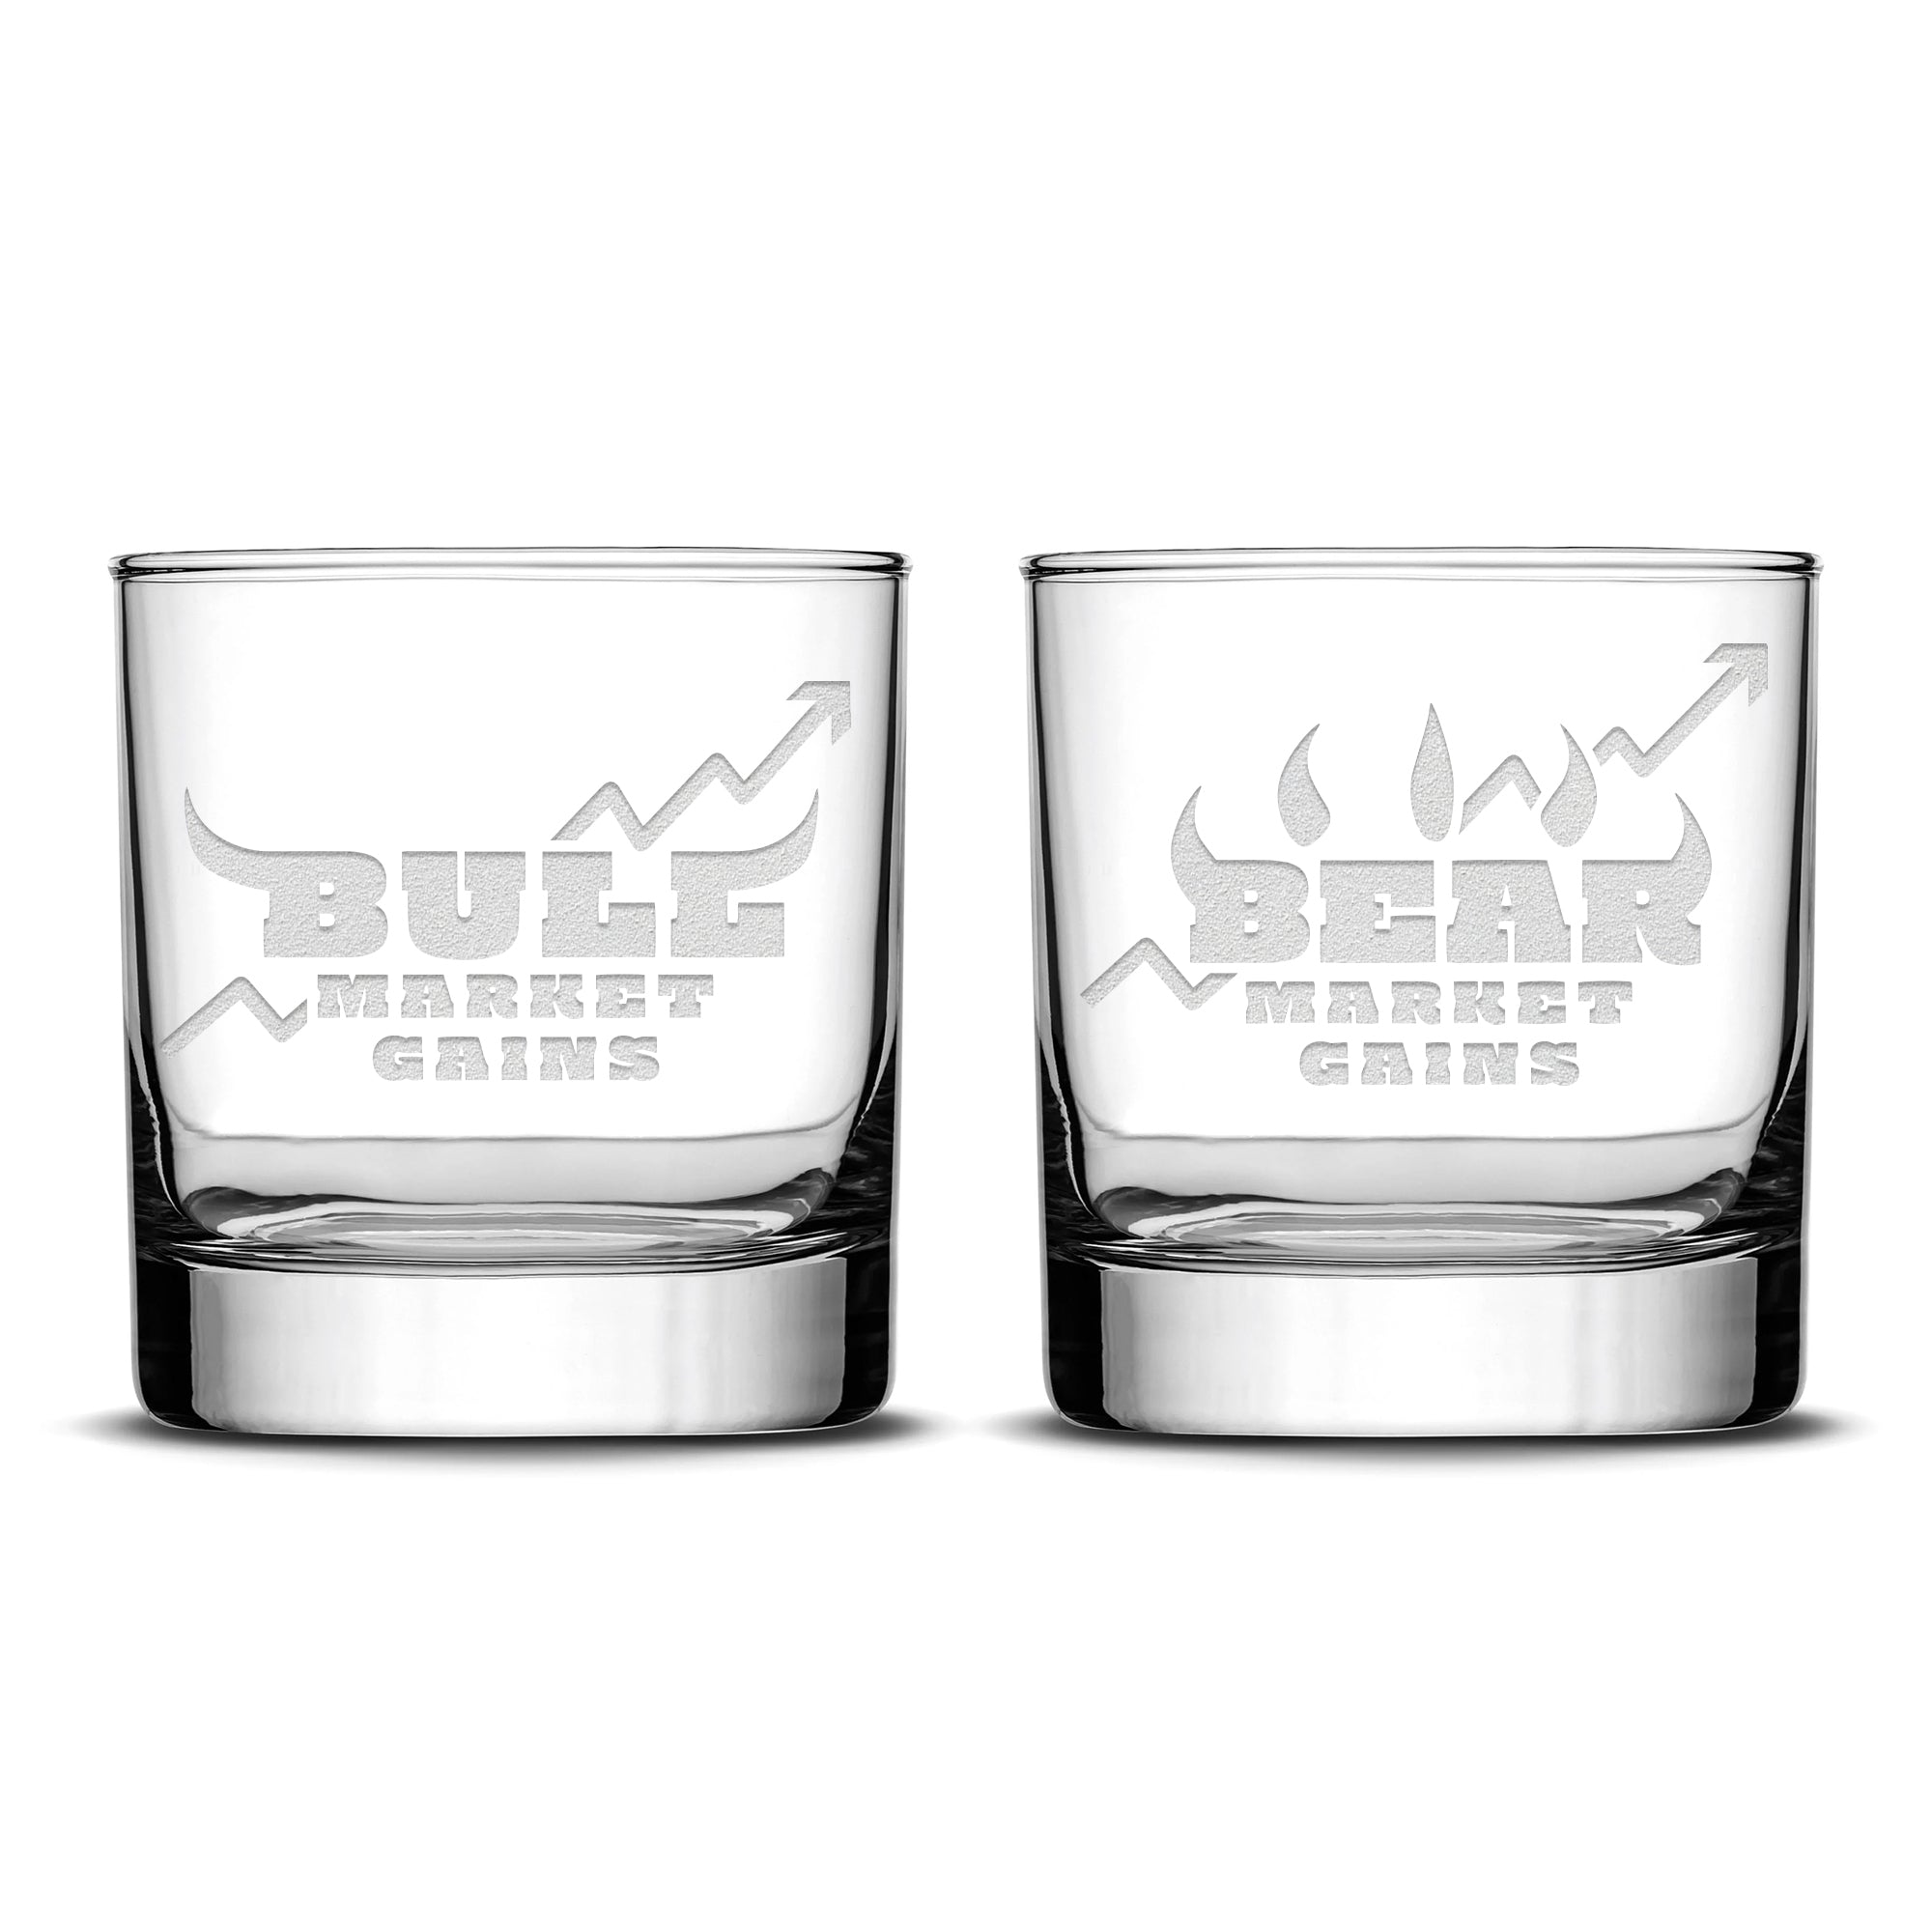 Integrity Bottles Premium, Stock Market Gains, Whiskey Glass (Set of 2), Hand Made in USA, Laser Etched or Hand Etched, 11oz